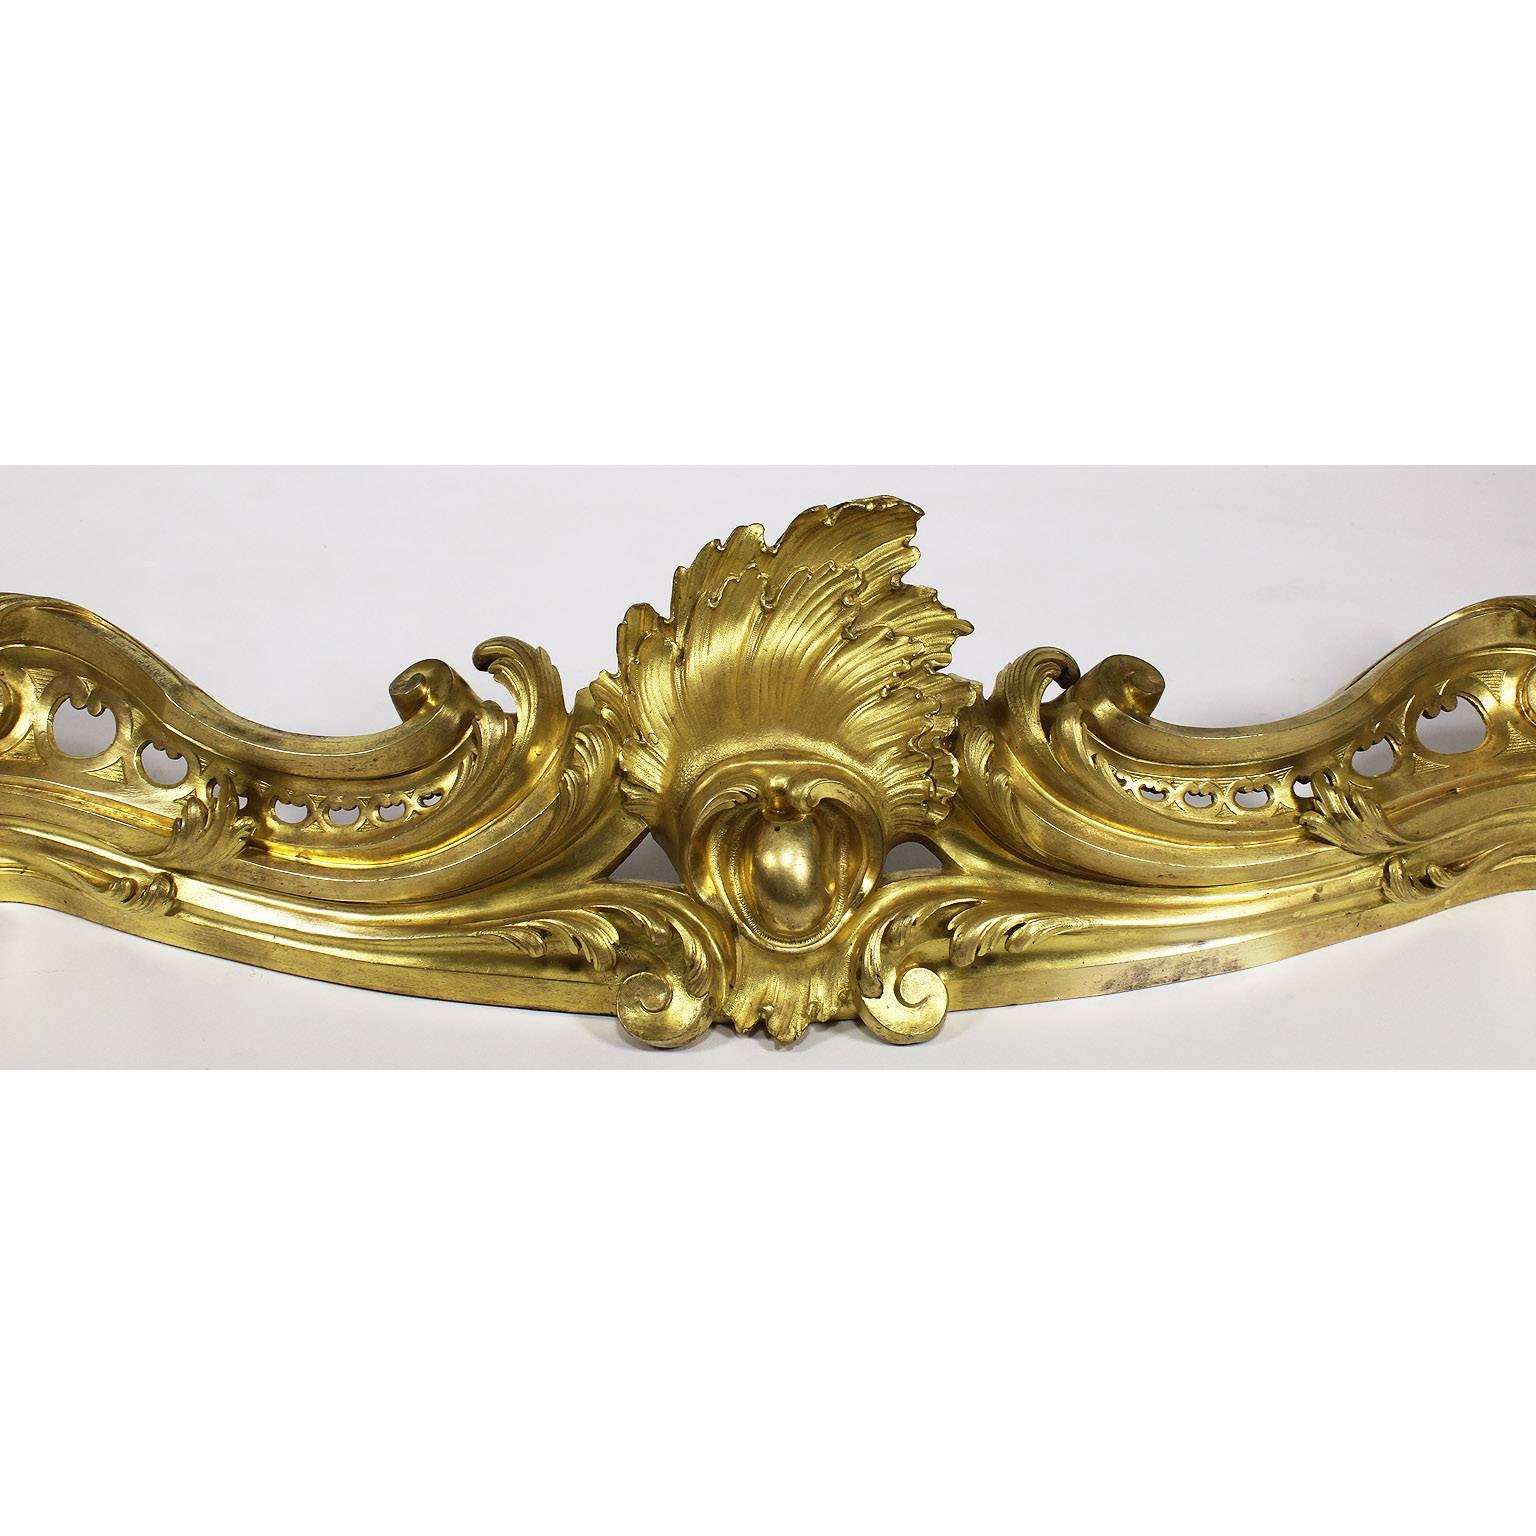 A fine French Belle Époque ormolu fireplace Mantel Andiron Fender, attributed to François Linke (1855-1946) and probably designed by Léon Messagé (1842-1901), of serpentine form, cast with pierced scrolls, shells, shields and acanthus. A truly